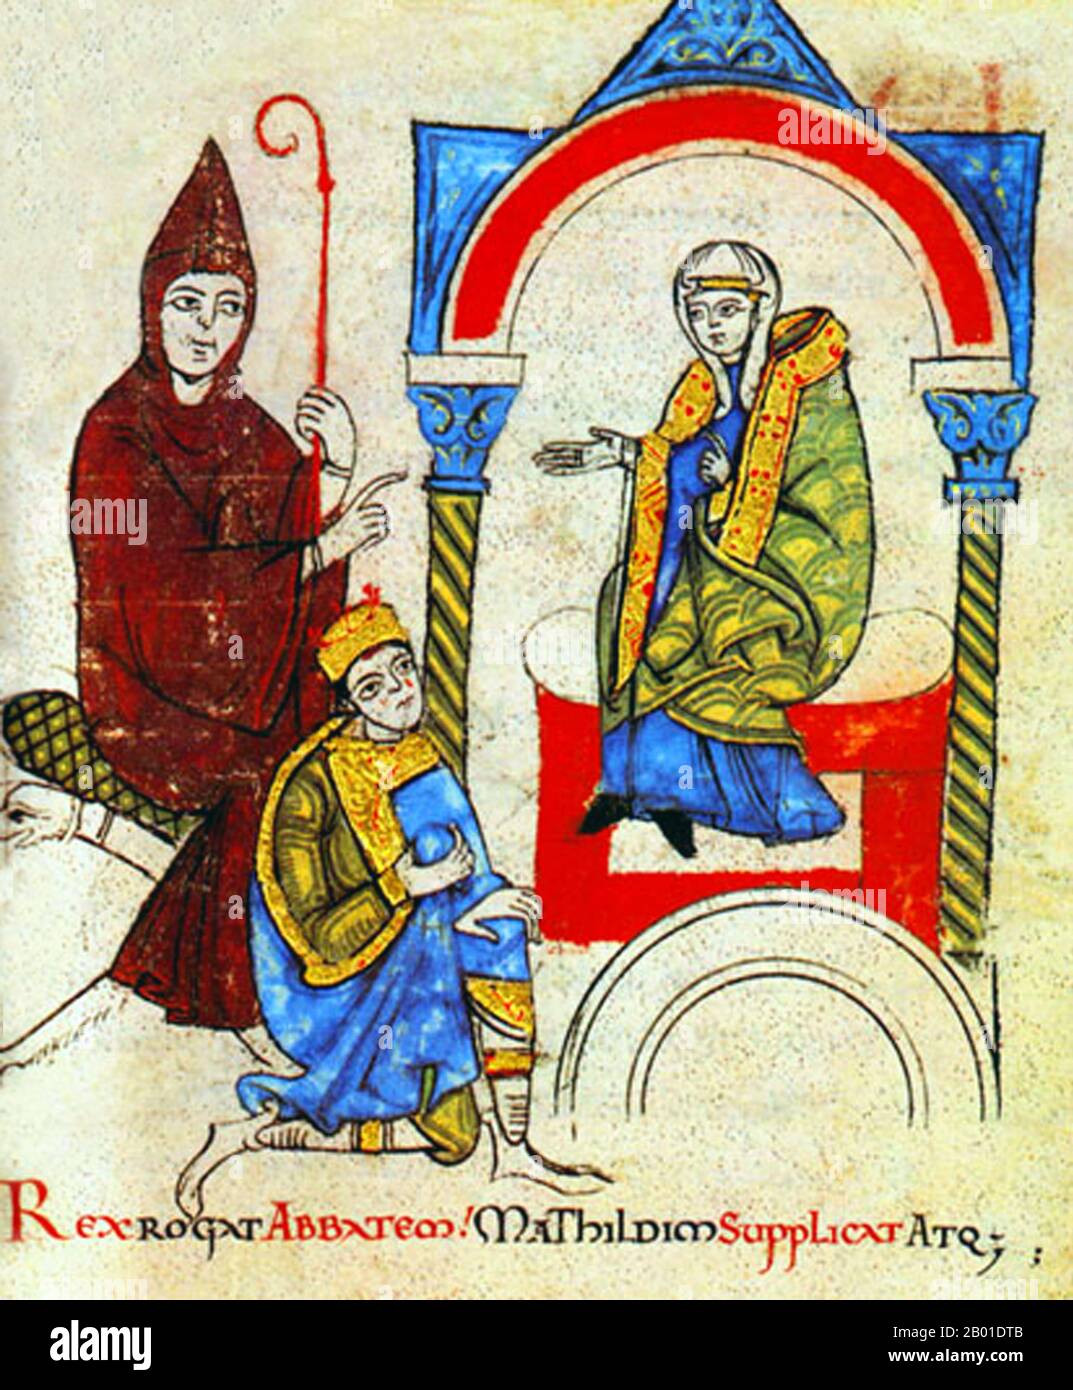 Italy: Holy Roman Emperor Henry IV Begging Countess Matilda of Tuscany (1046-1115) and Abbot Hugh of Cluny to intercede for Him with Pope Gregory VII. Miniature painting, Vatican Codex 4922, 1115 CE.  Matilda of Tuscany (Italian: Matilde, Latin: Mathilda) (1046-24 July 1115) was an Italian noblewoman, the principal Italian supporter of Pope Gregory VII during the Investiture Controversy. She is one of the few medieval women to be remembered for her military accomplishments. She is sometimes called la Gran Contessa (the Great Countess) or Matilda of Canossa after her ancestral castle. Stock Photo